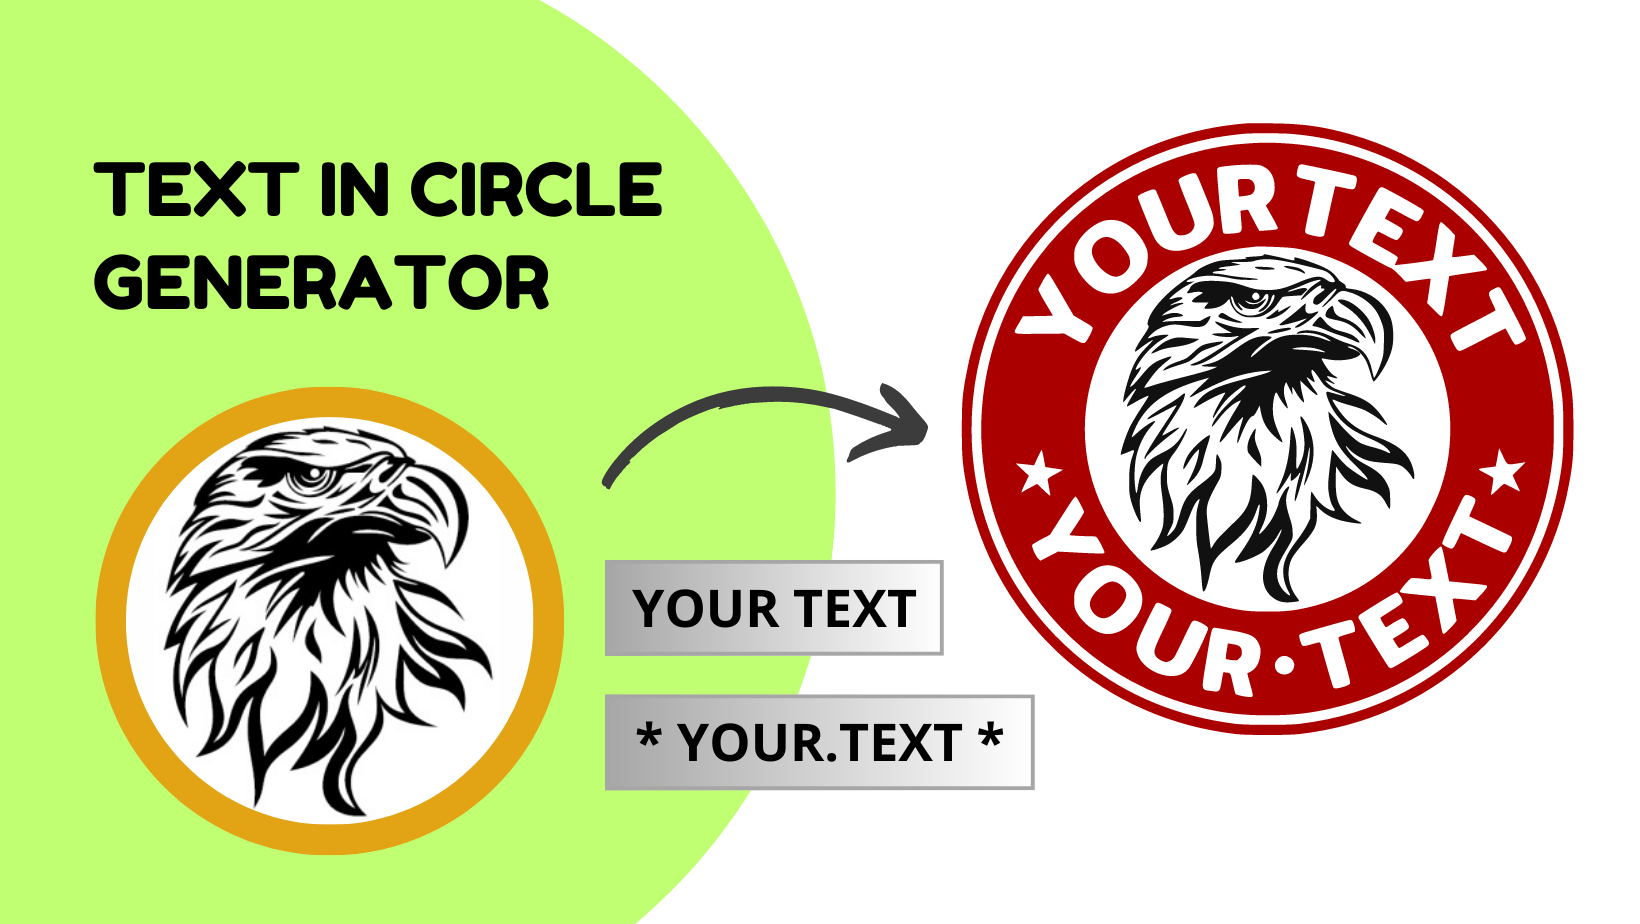 text in circle generator, circle text generator, curved text generator, words in a circle generator, round text online, write text in circle online, circle font generator, circle word generator, cricut, download, free, round word pfp maker, rounded text generator